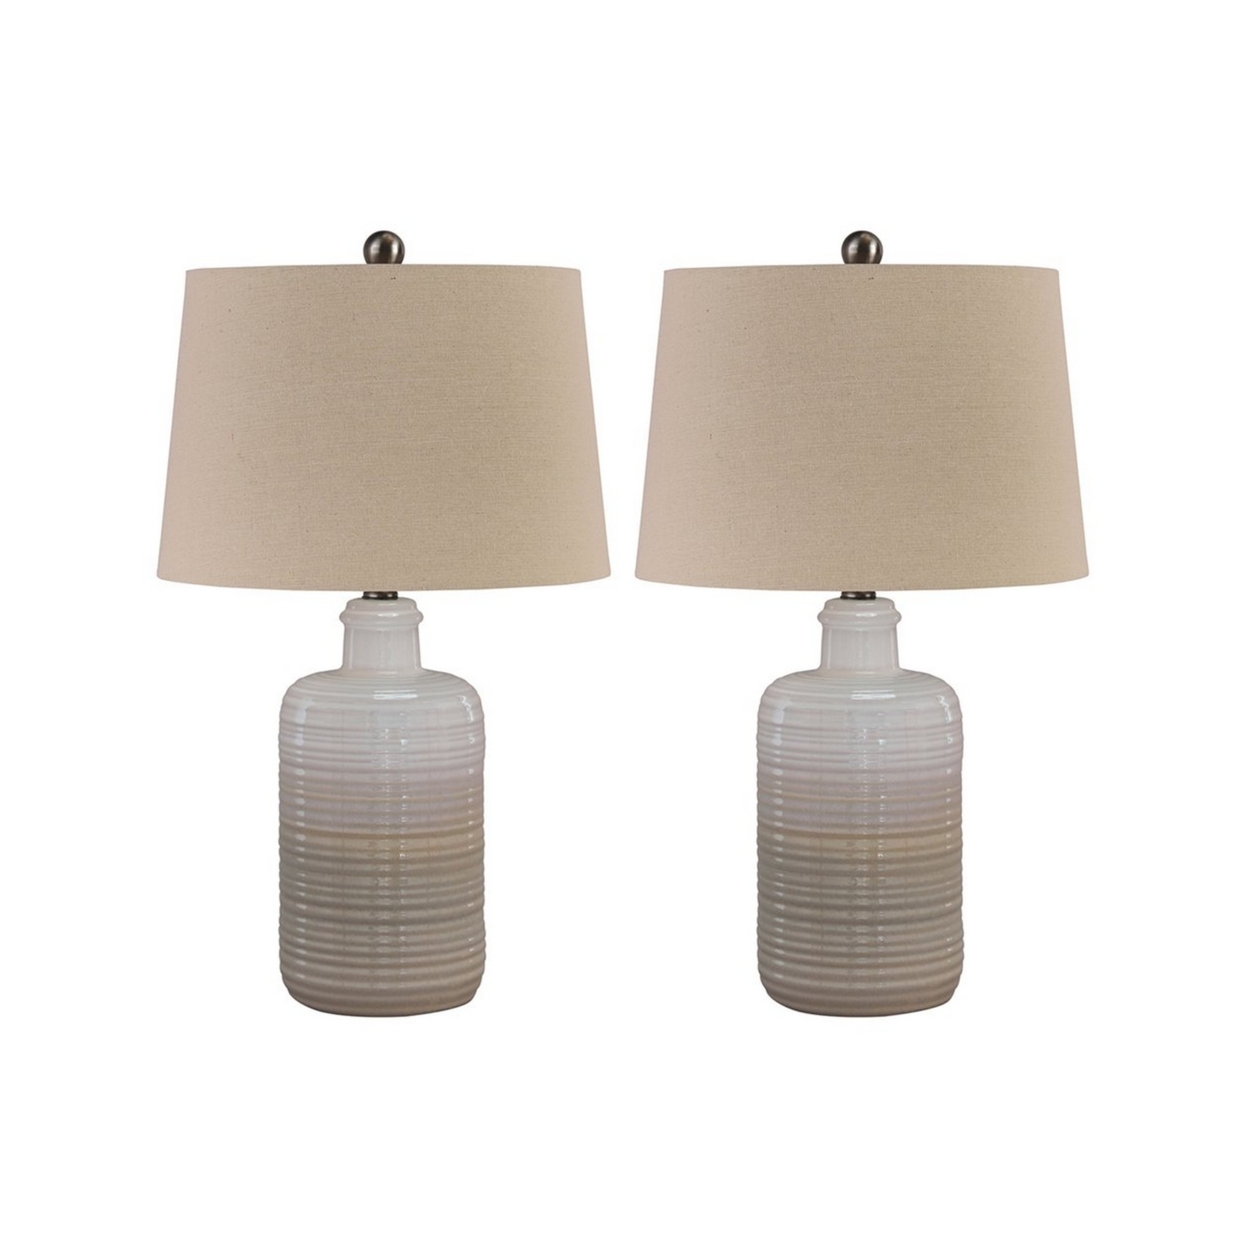 Ceramic Body Table Lamp With Brushed Details, Set Of 2, Beige And White- Saltoro Sherpi